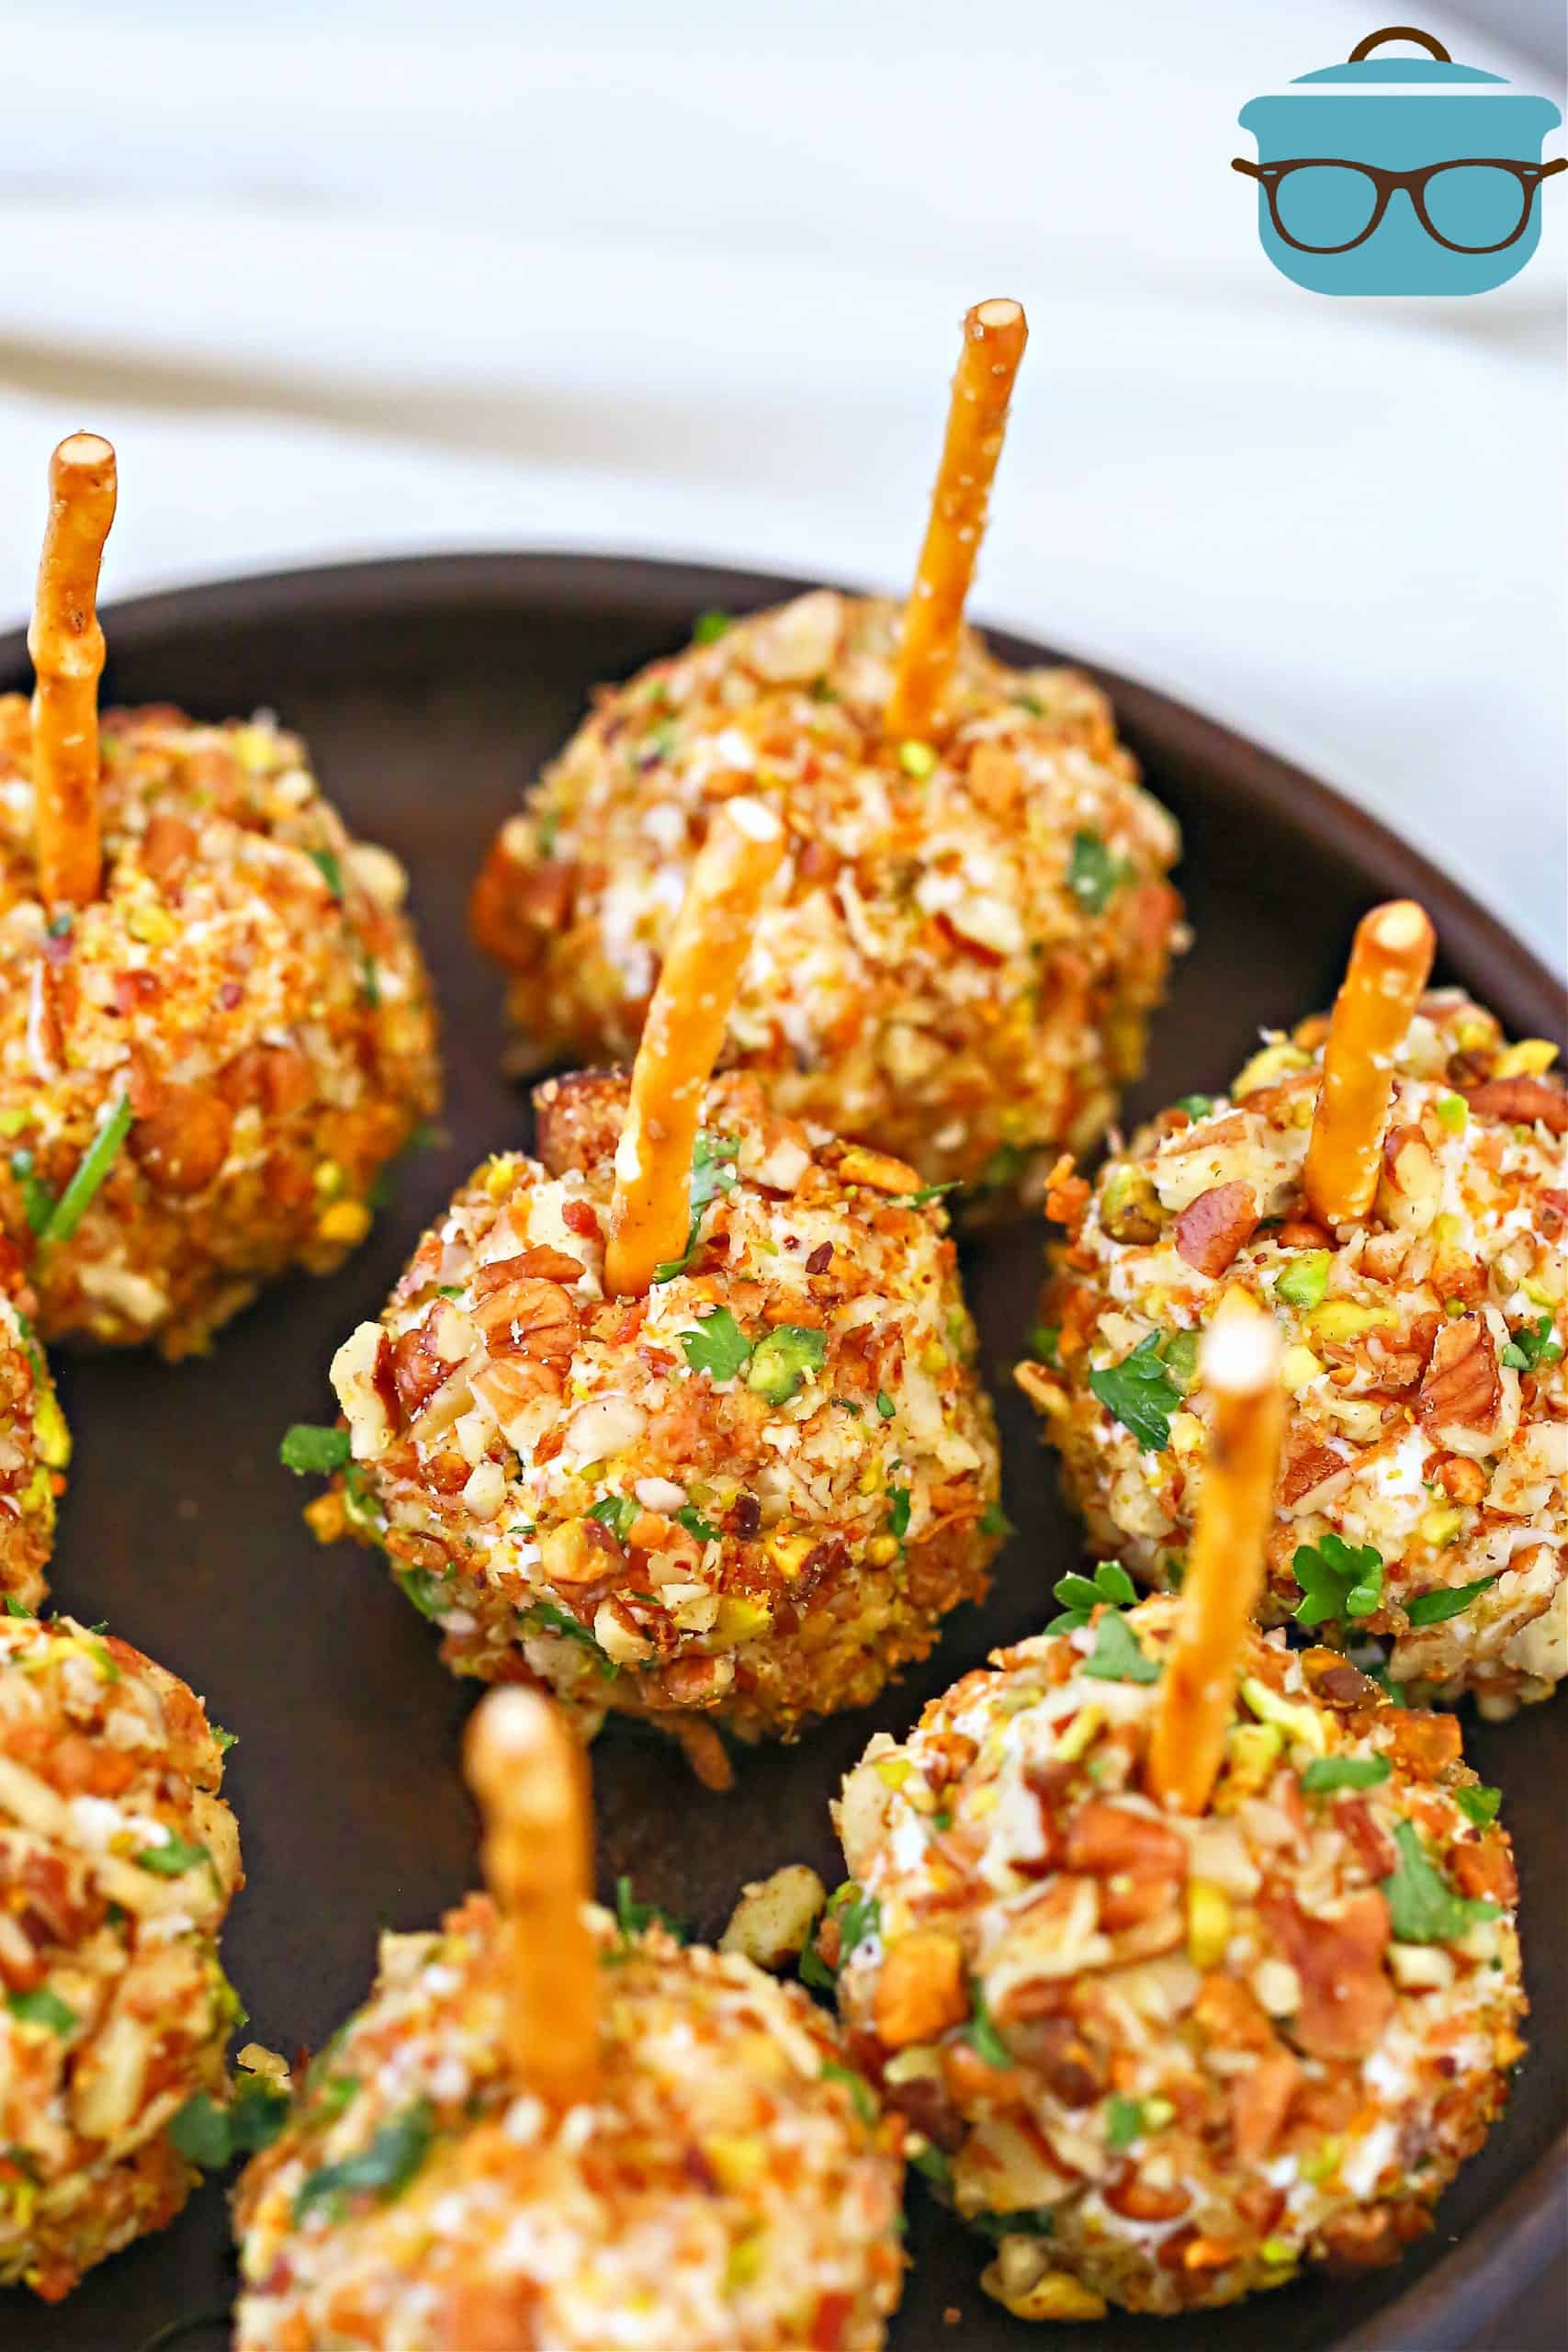 Easy Mini Pecan Coated Cheeseball appetizers with pretzel sticks shown on a black, circle platter.